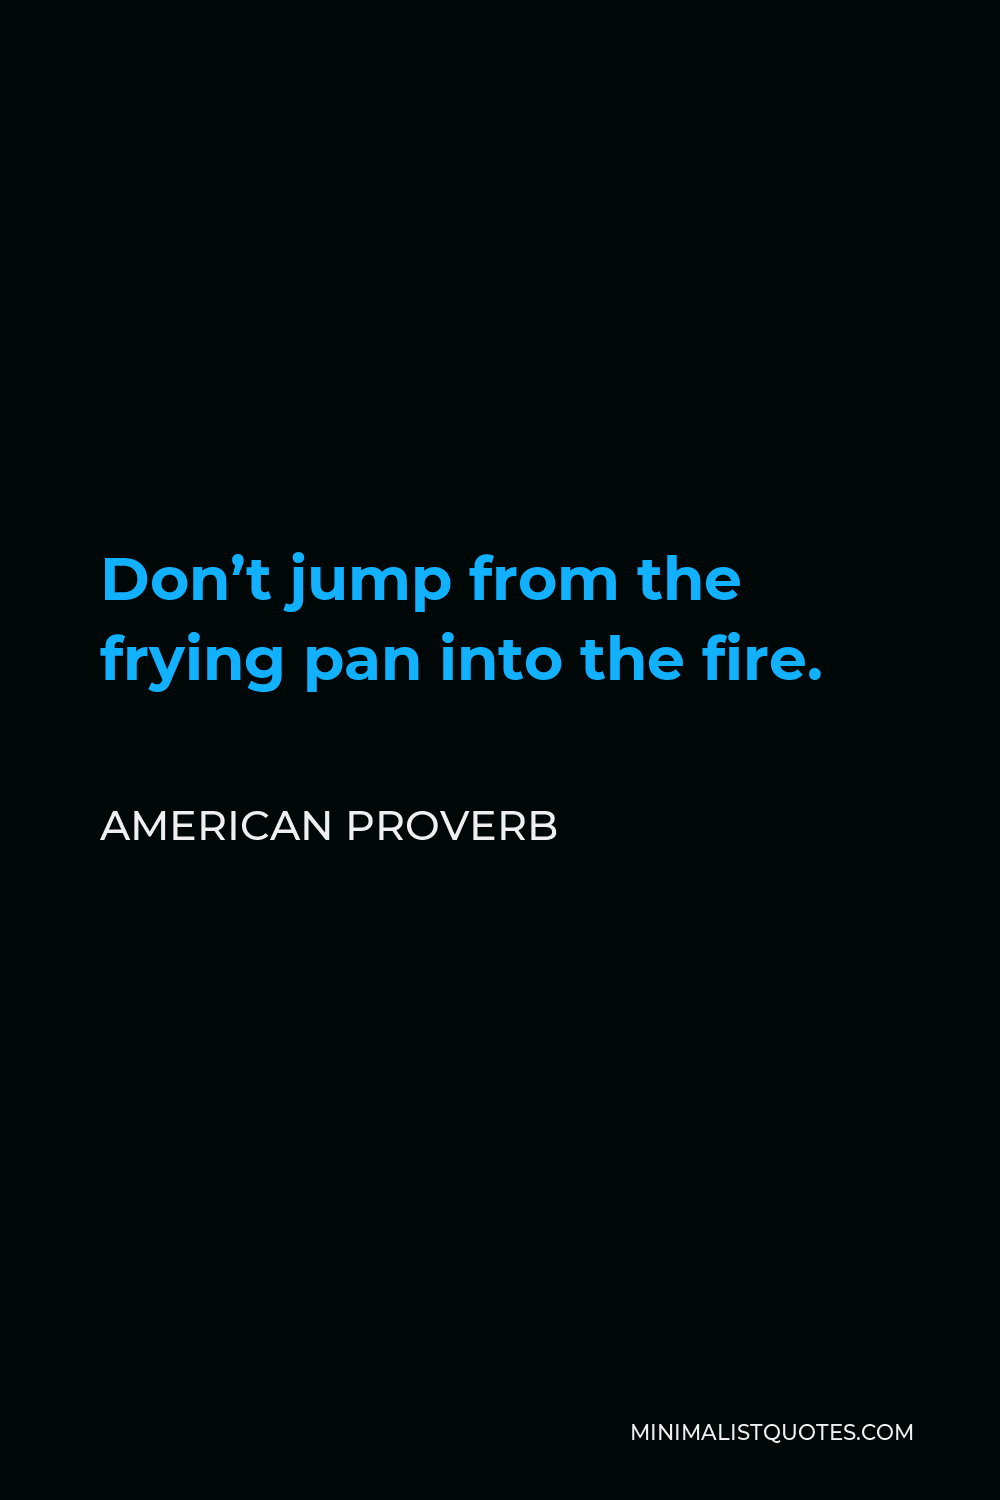 American Proverb Quote - Don’t jump from the frying pan into the fire.